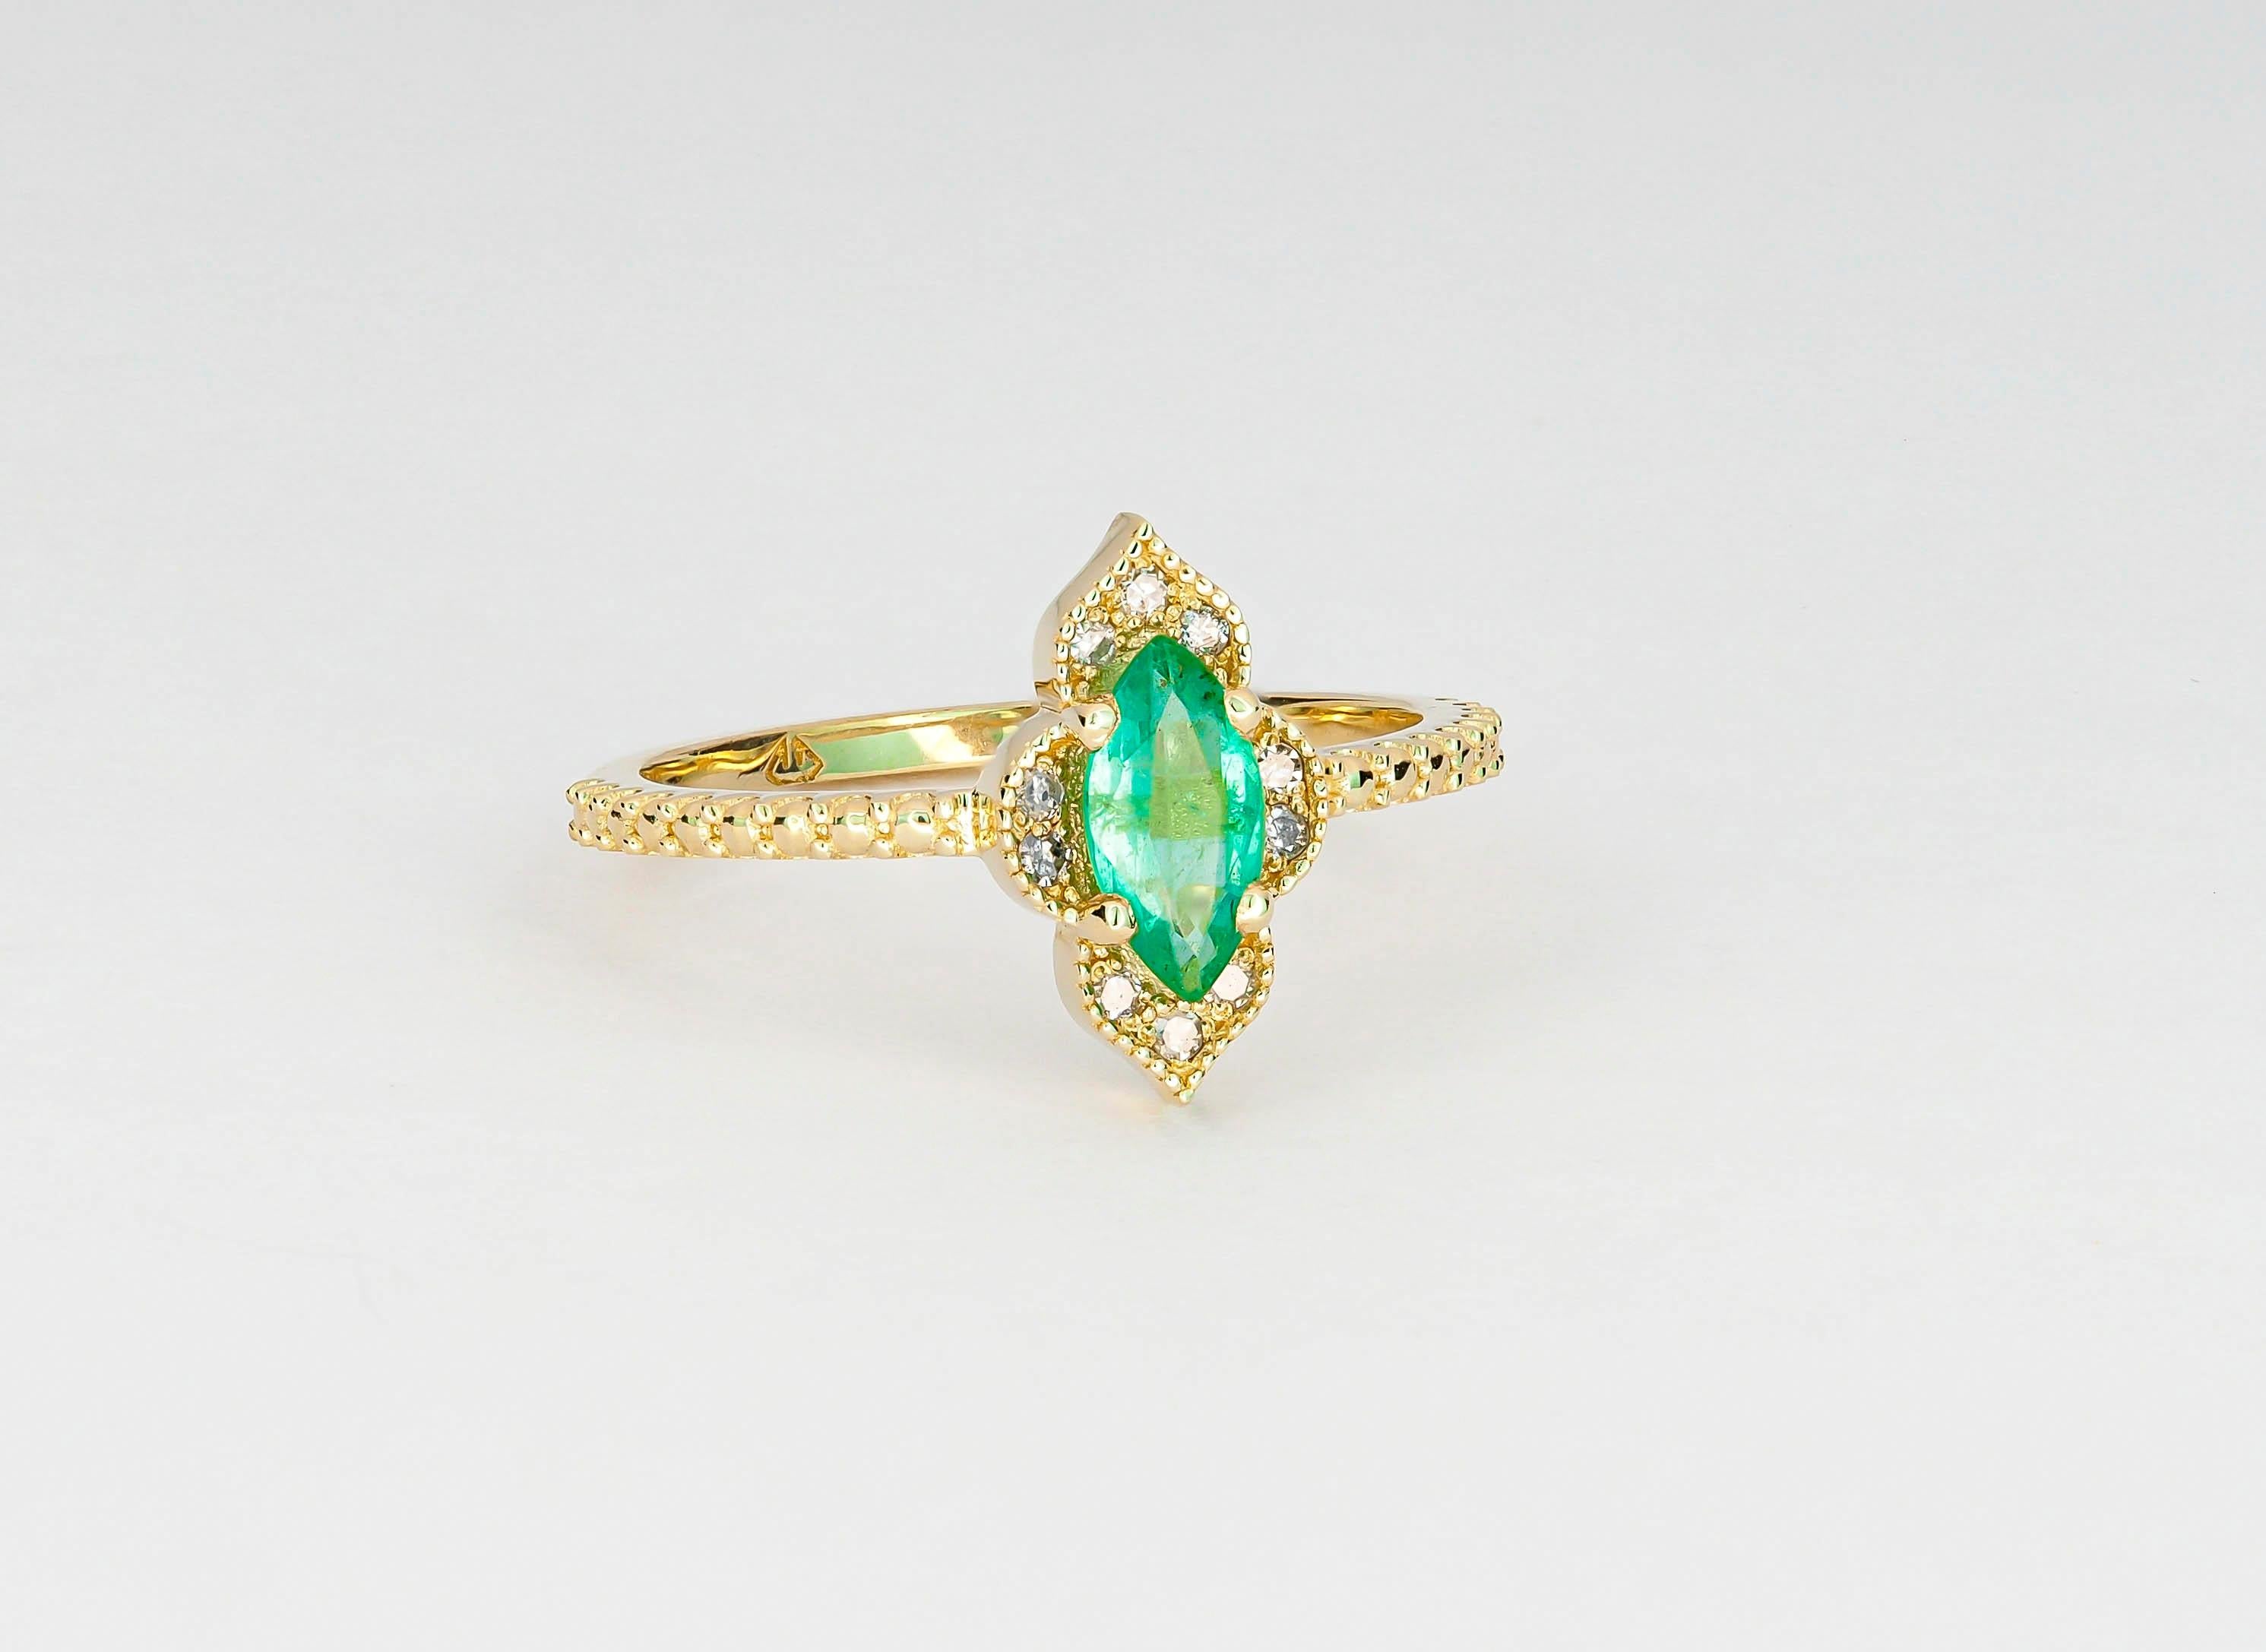 For Sale:  14k Gold Ring with Marquise Cut Emerald and Diamonds 5